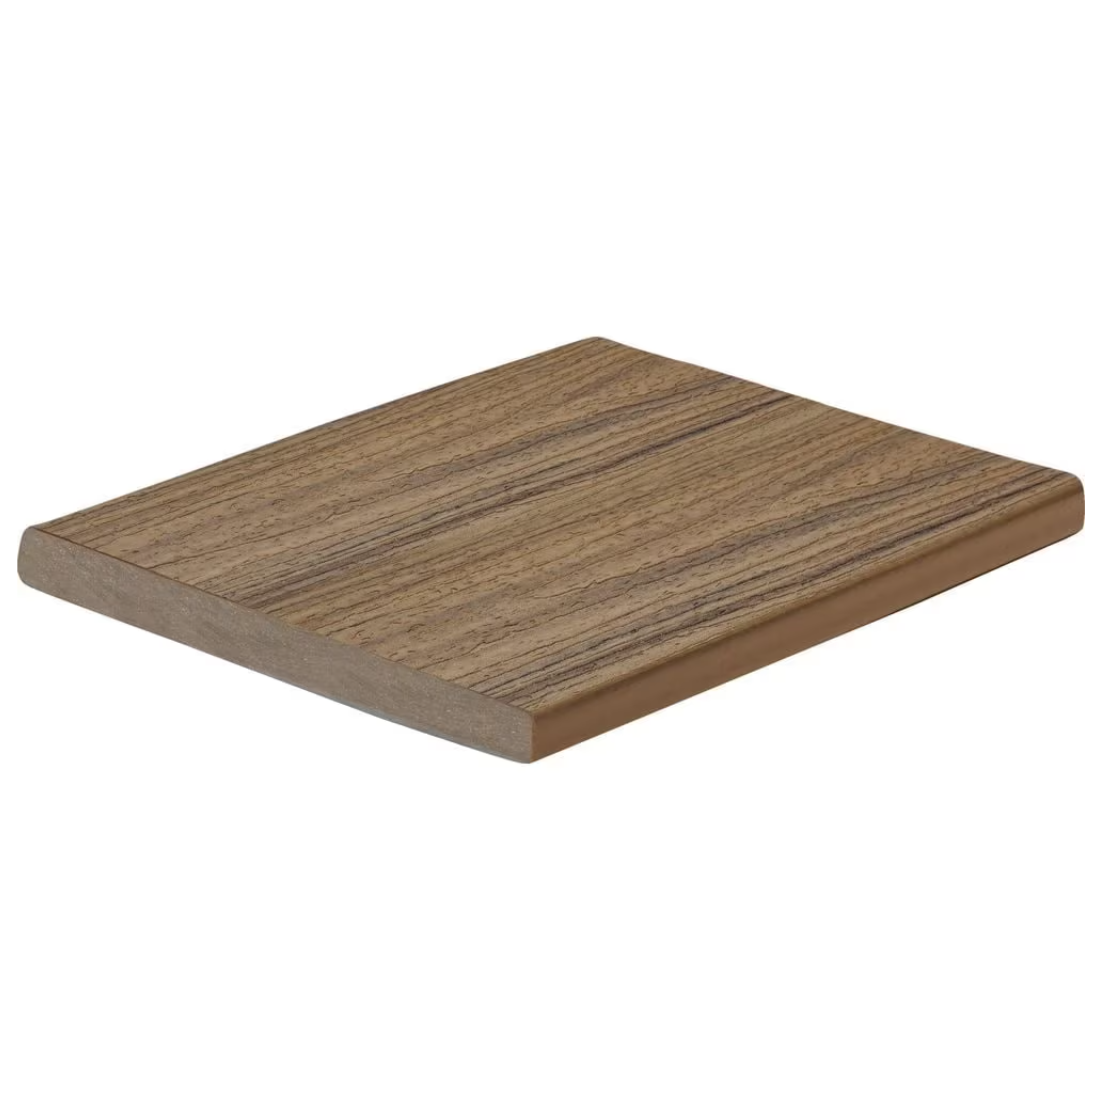 Trex Enhance Naturals Fascia Board Toasted Sand 1 in x 8 in x 12 ft